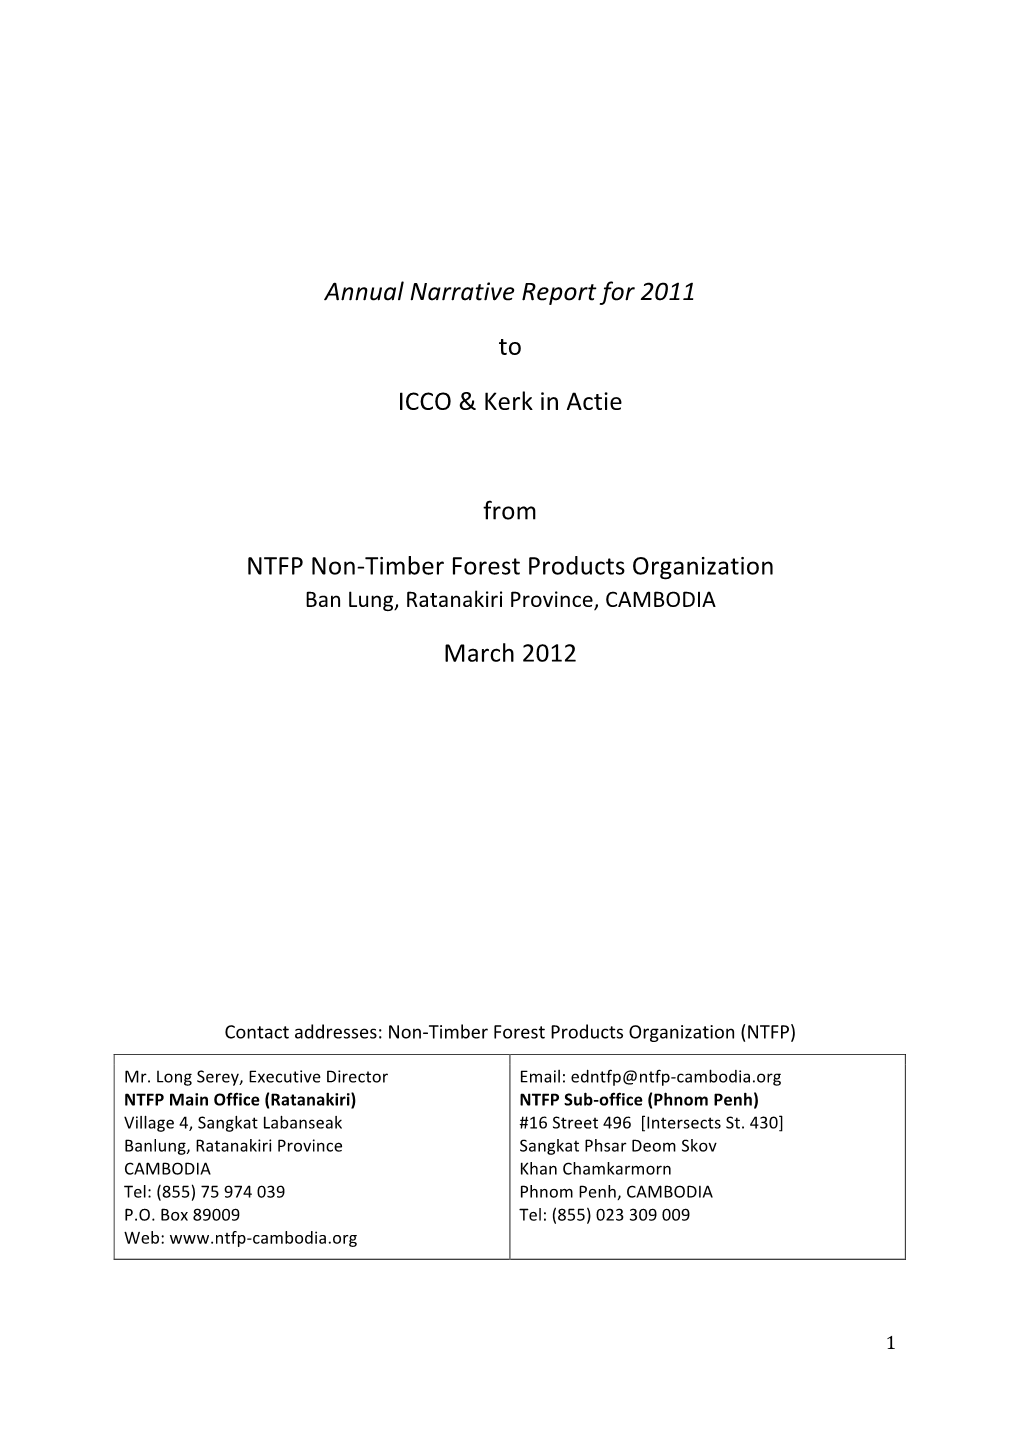 Annual Narrative Report for 2011 to ICCO & Kerk in Actie from NTFP